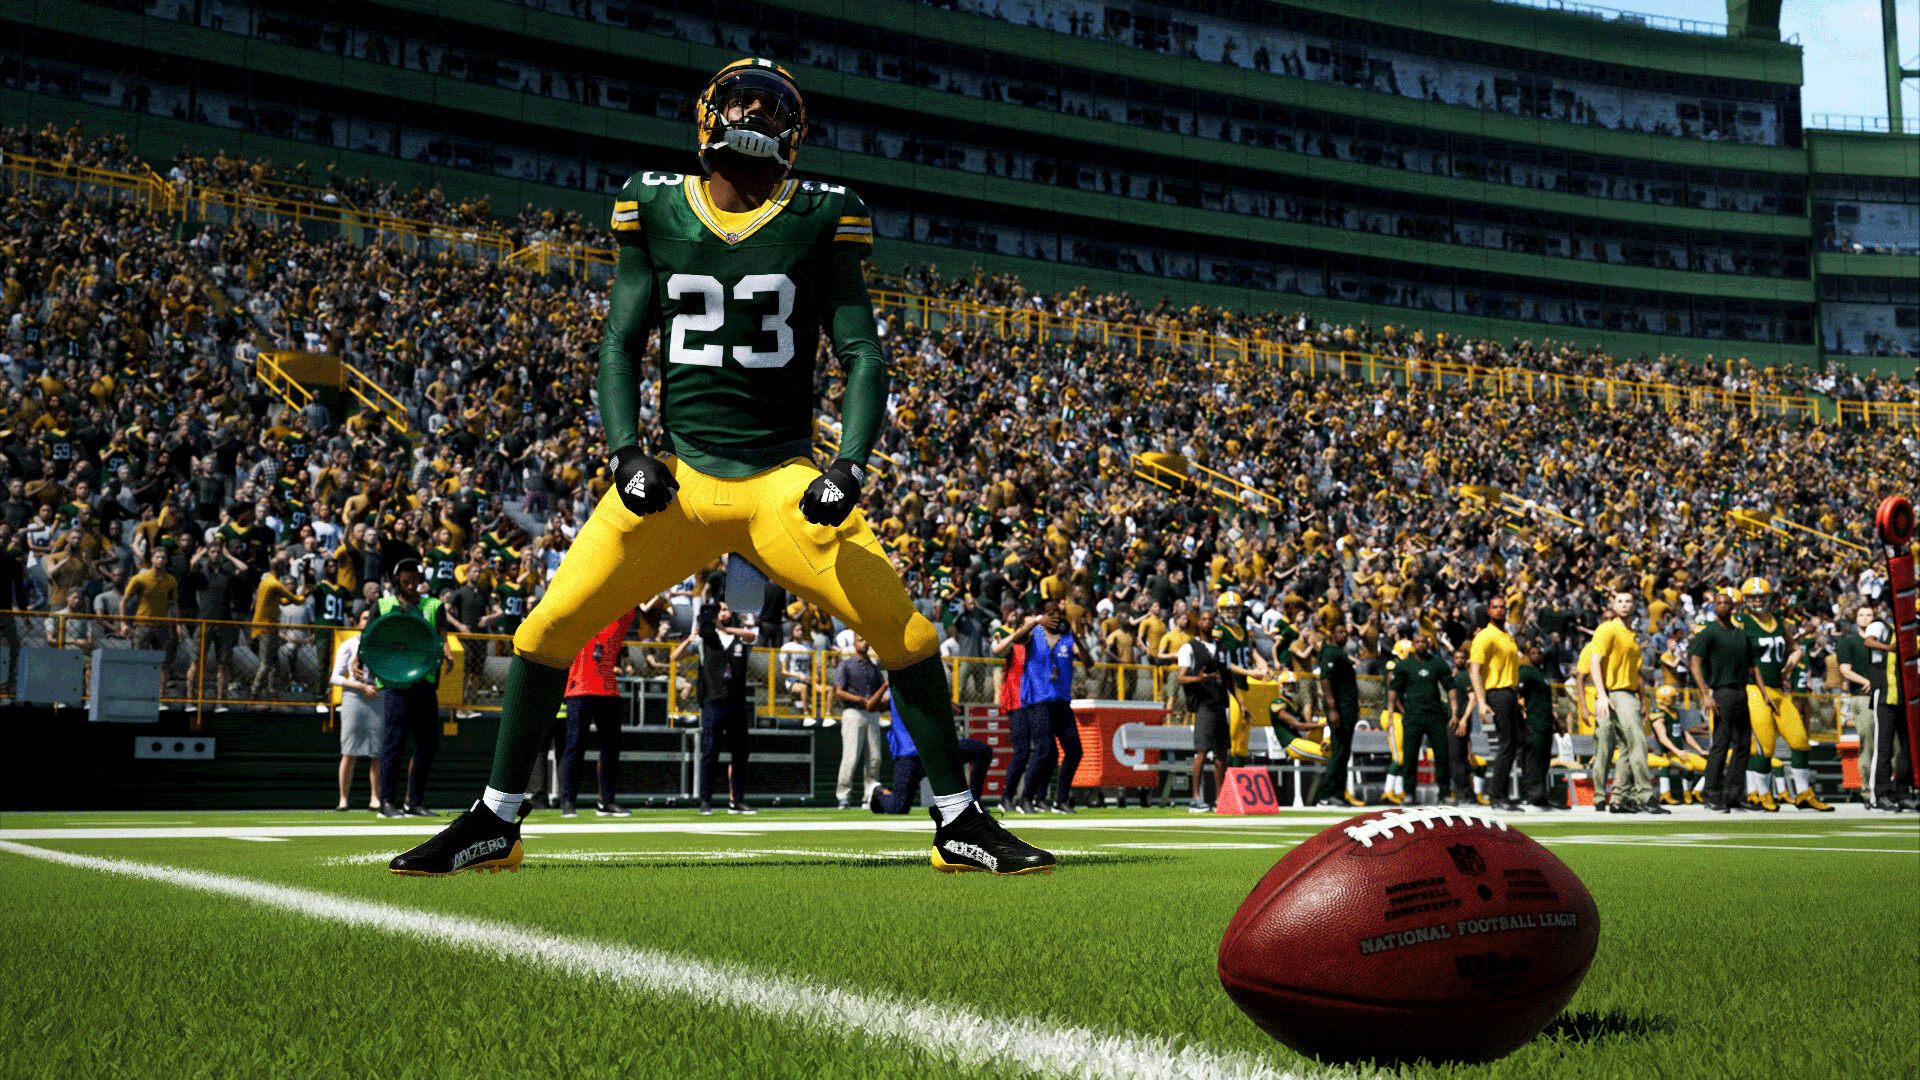 Footage captured from Madden NFL 24 shows a Green Bay Packers defensive player celebrating a stop in the background while showing the football inches short of the goal line in the foreground.